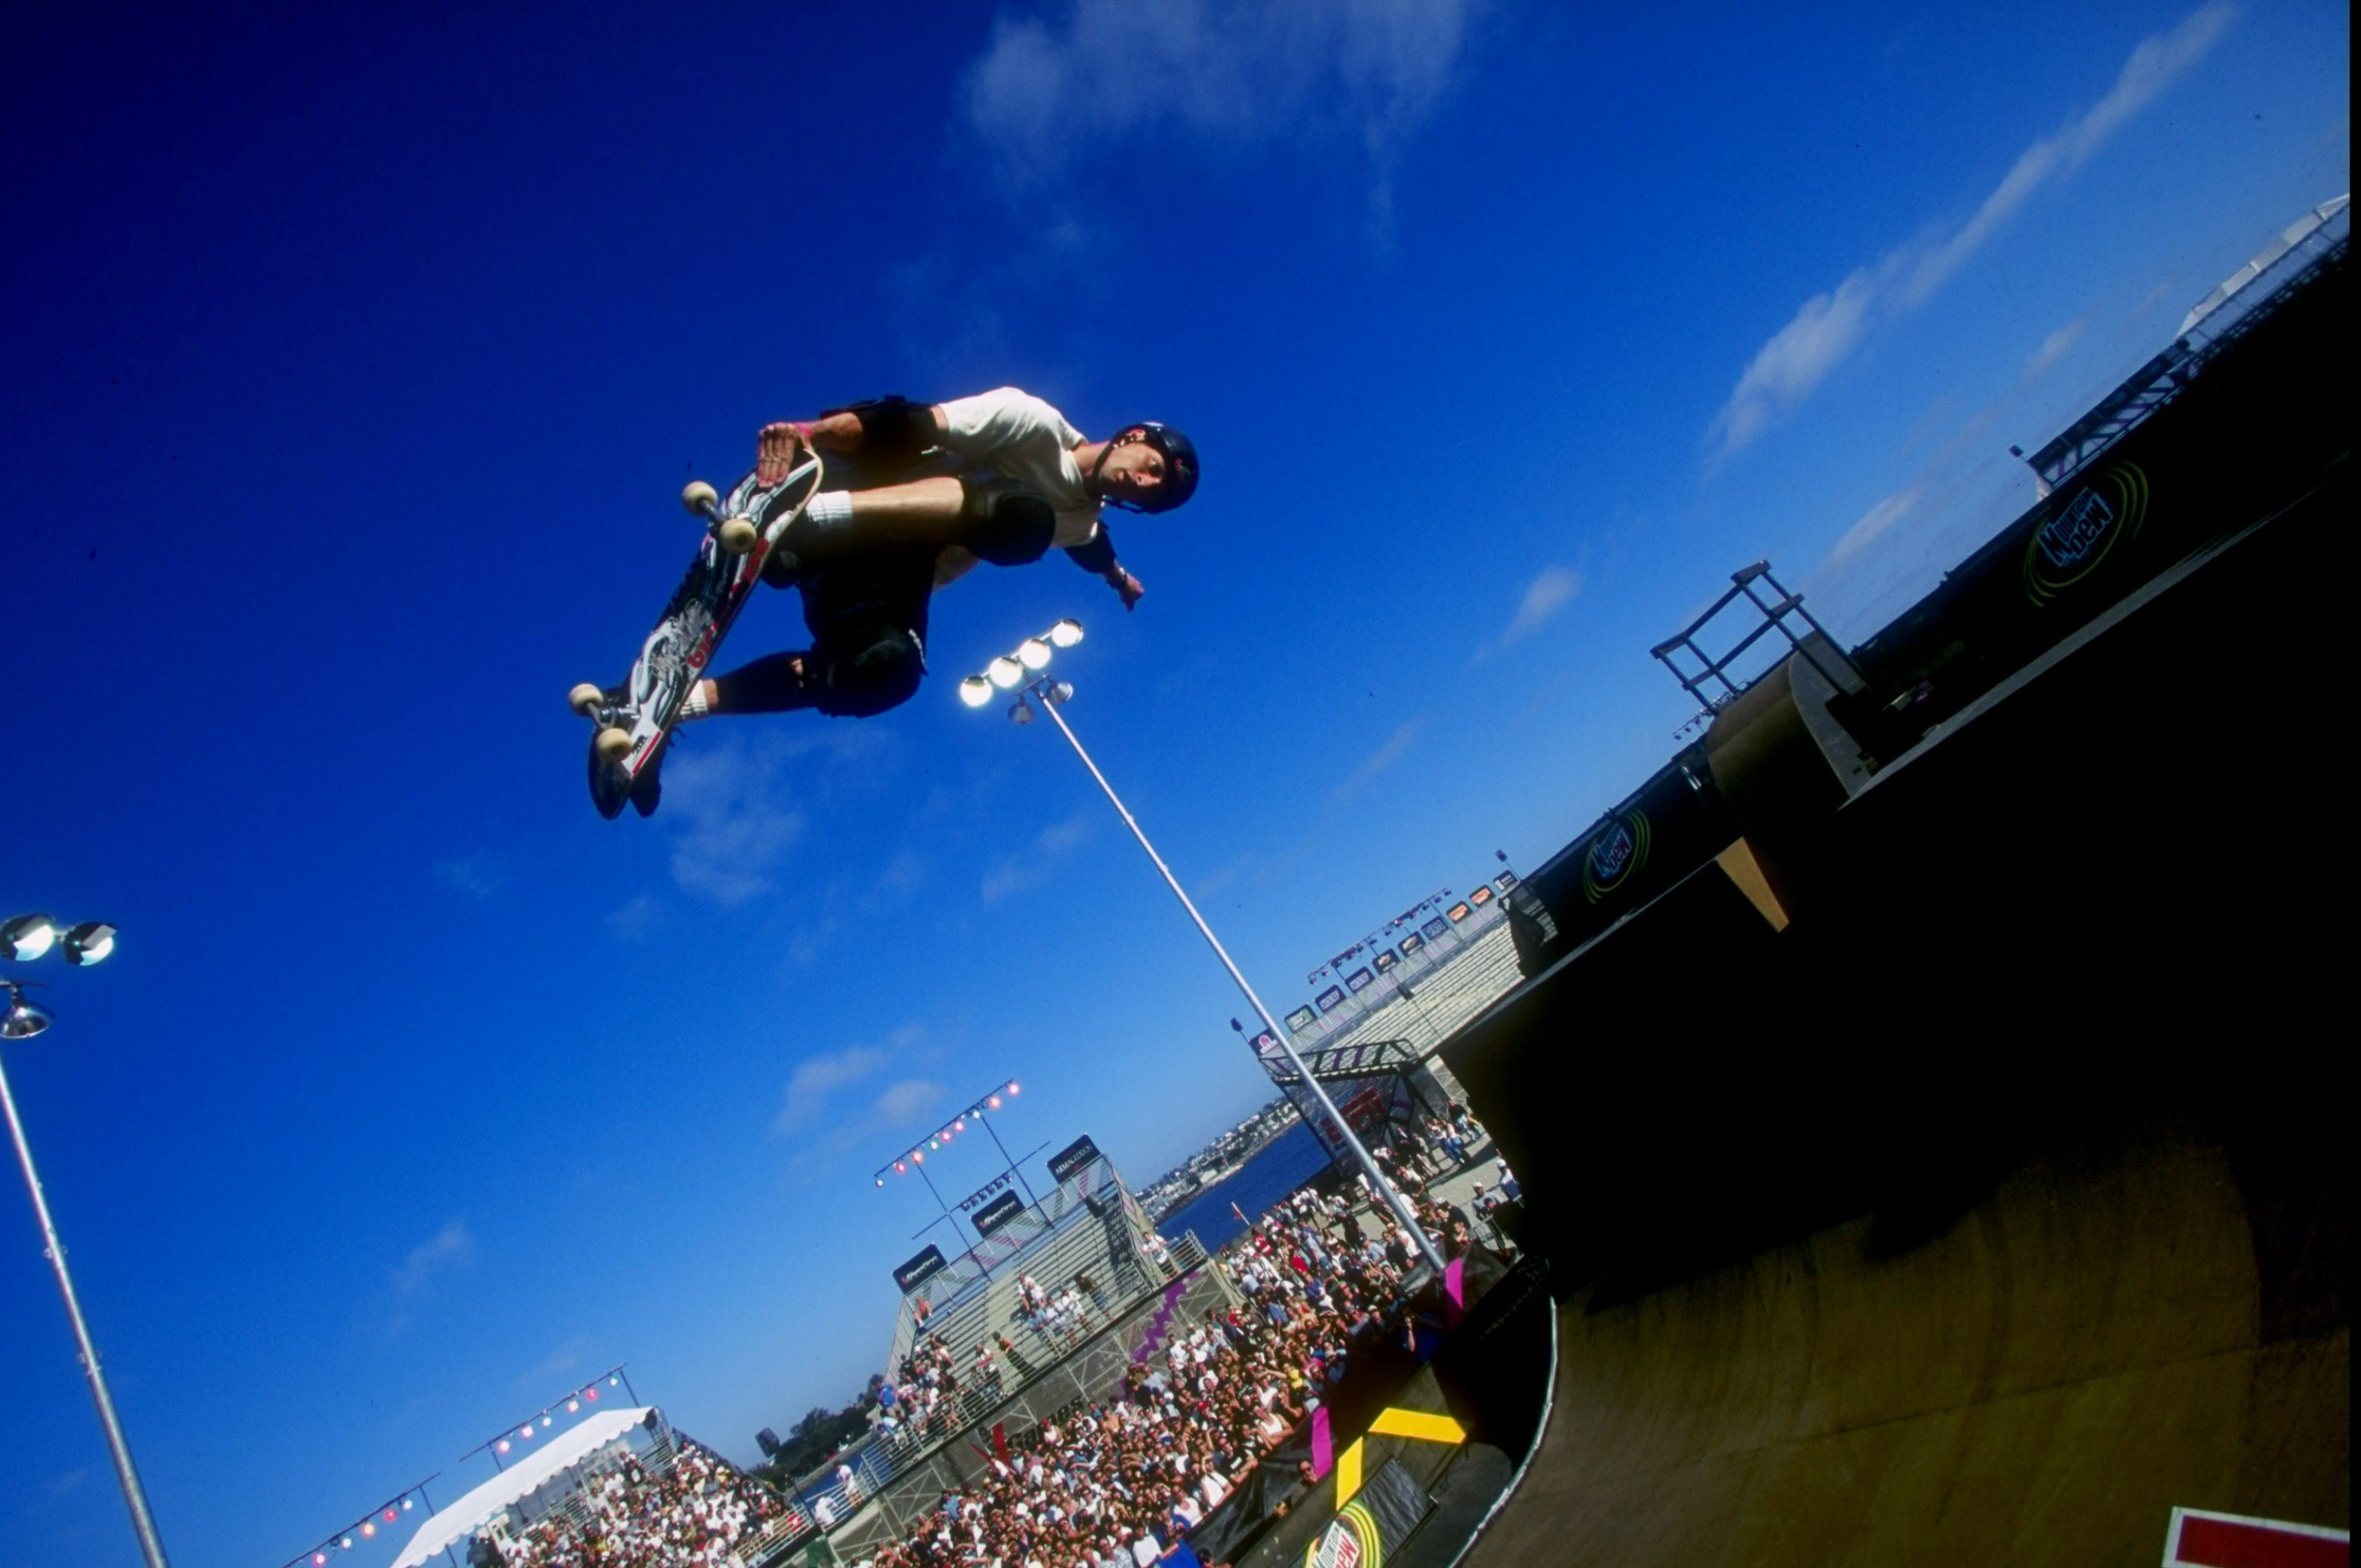 They need the cool factor': Tony Hawk on skateboarding at Tokyo 2020